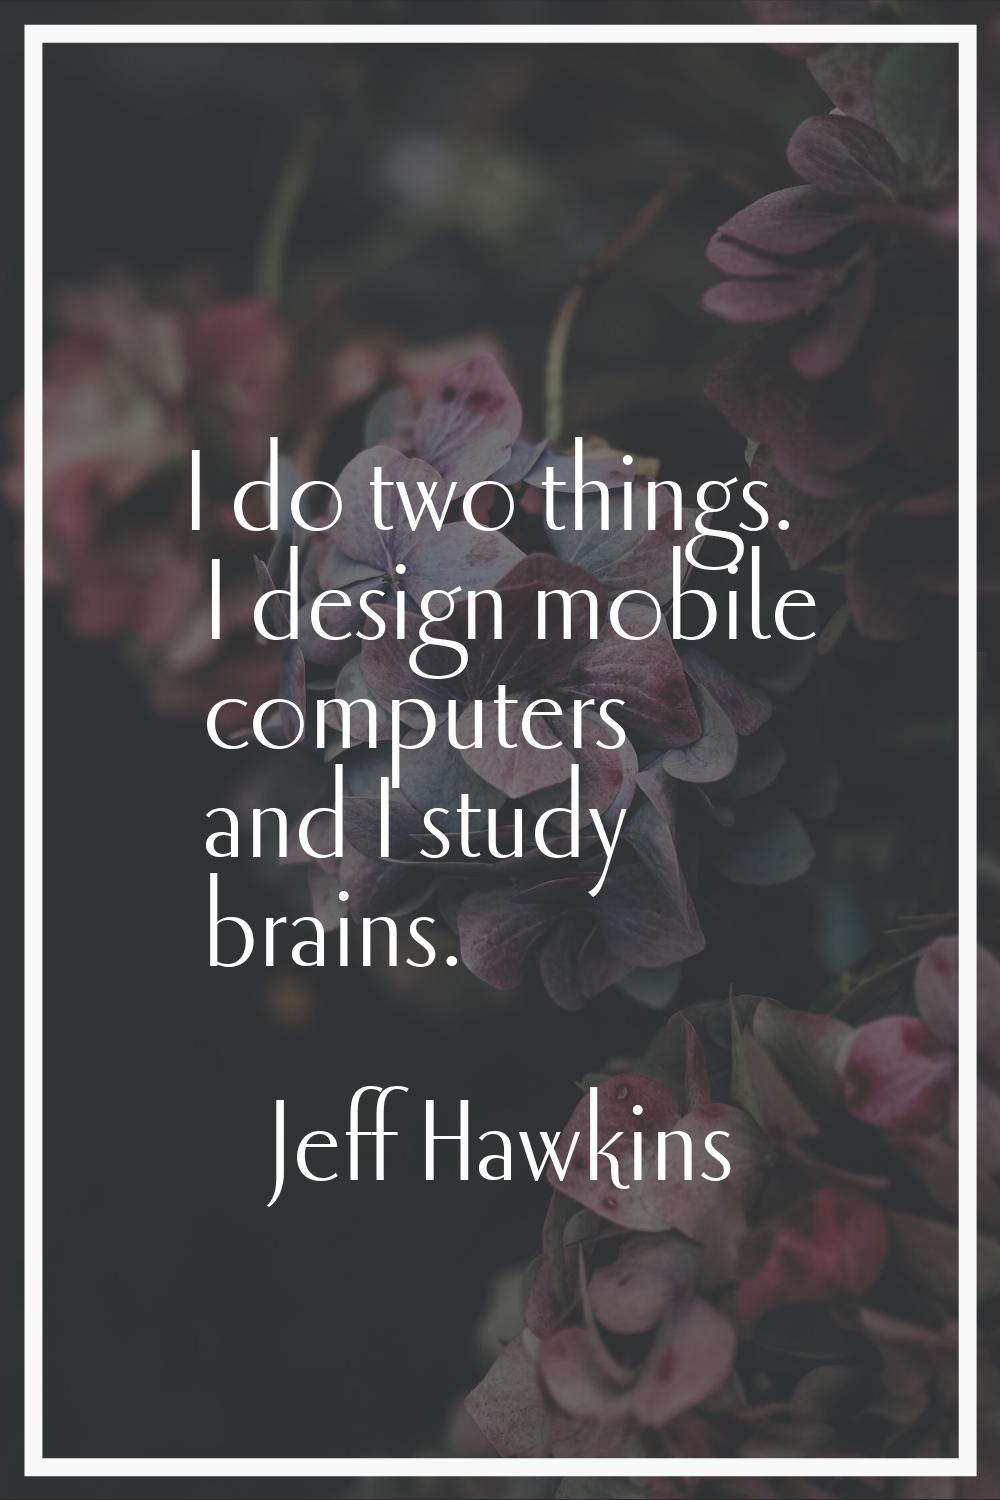 I do two things. I design mobile computers and I study brains.